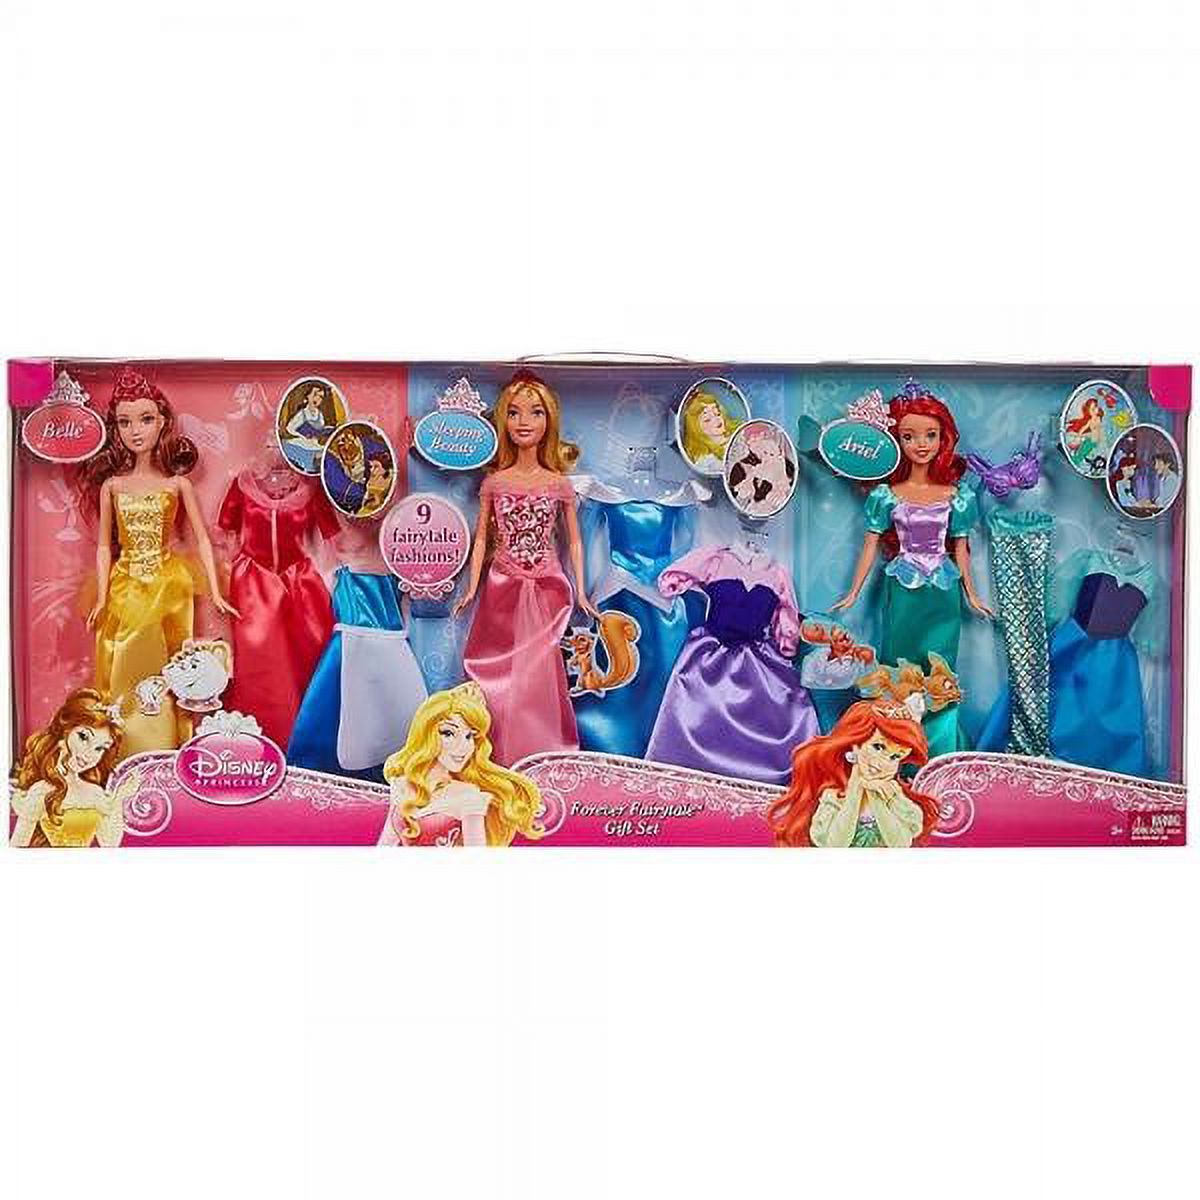 Disney Princess Disney Rags To Riches - image 1 of 2